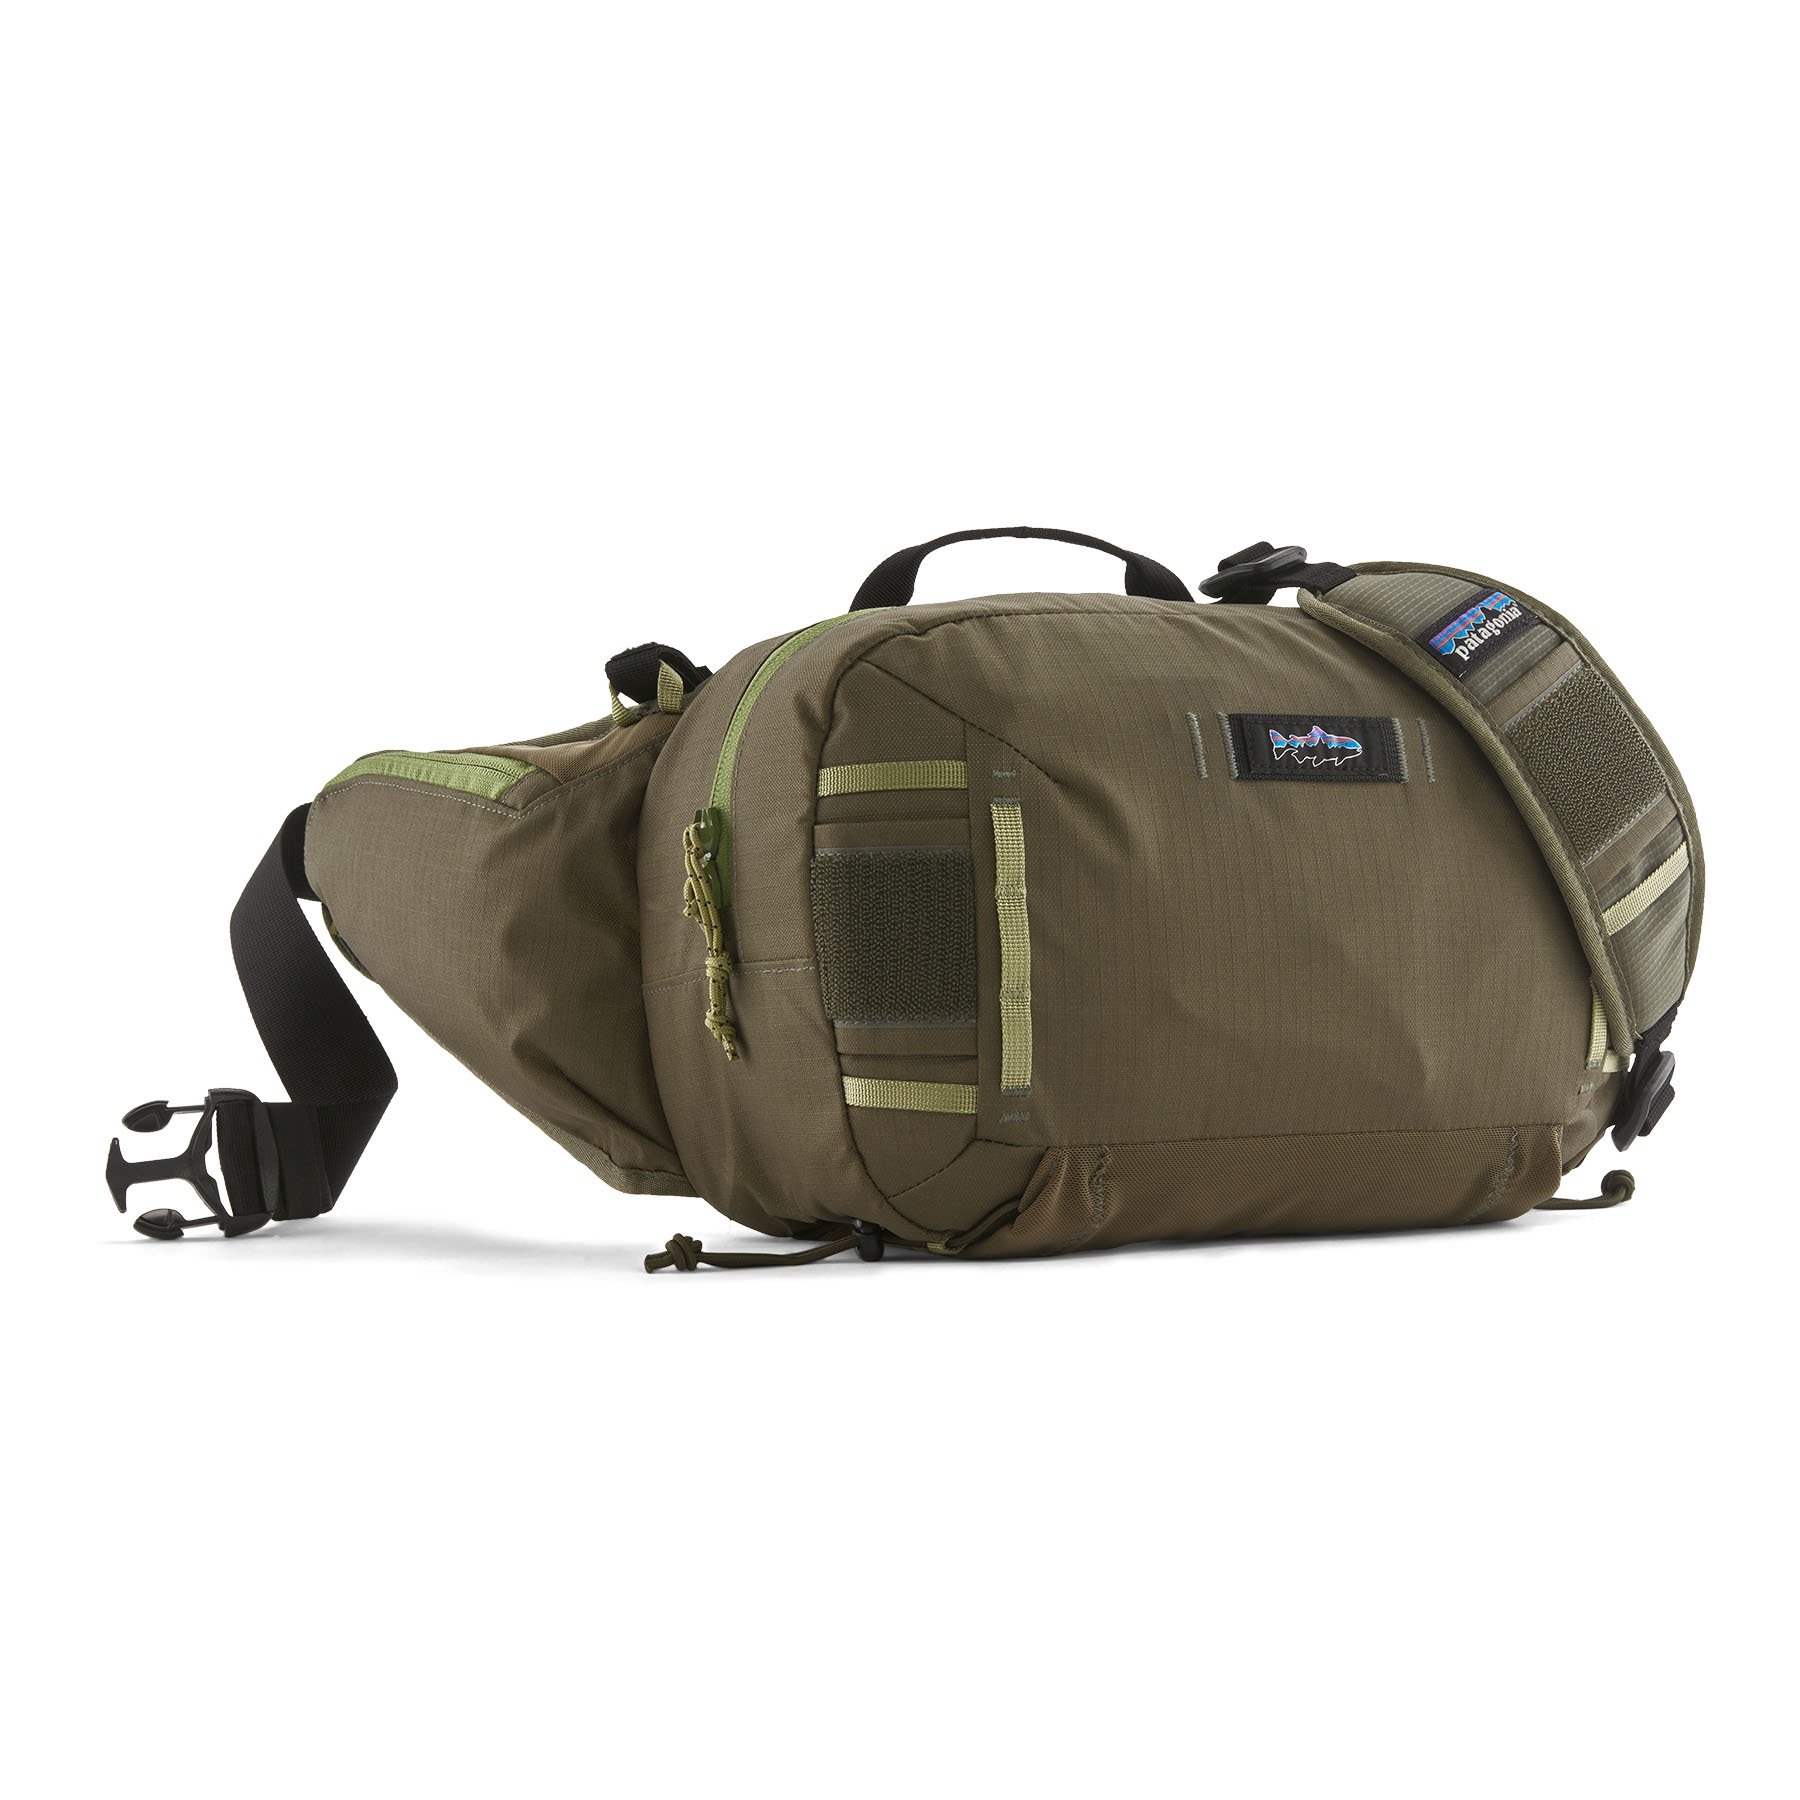 https://cdn.anglingactive.co.uk/media/catalog/product/cache/c7a5695839b539f20c8015776a05748c/p/a/patagonia_stealth_hip_pack_basin_green_angling_active.jpg